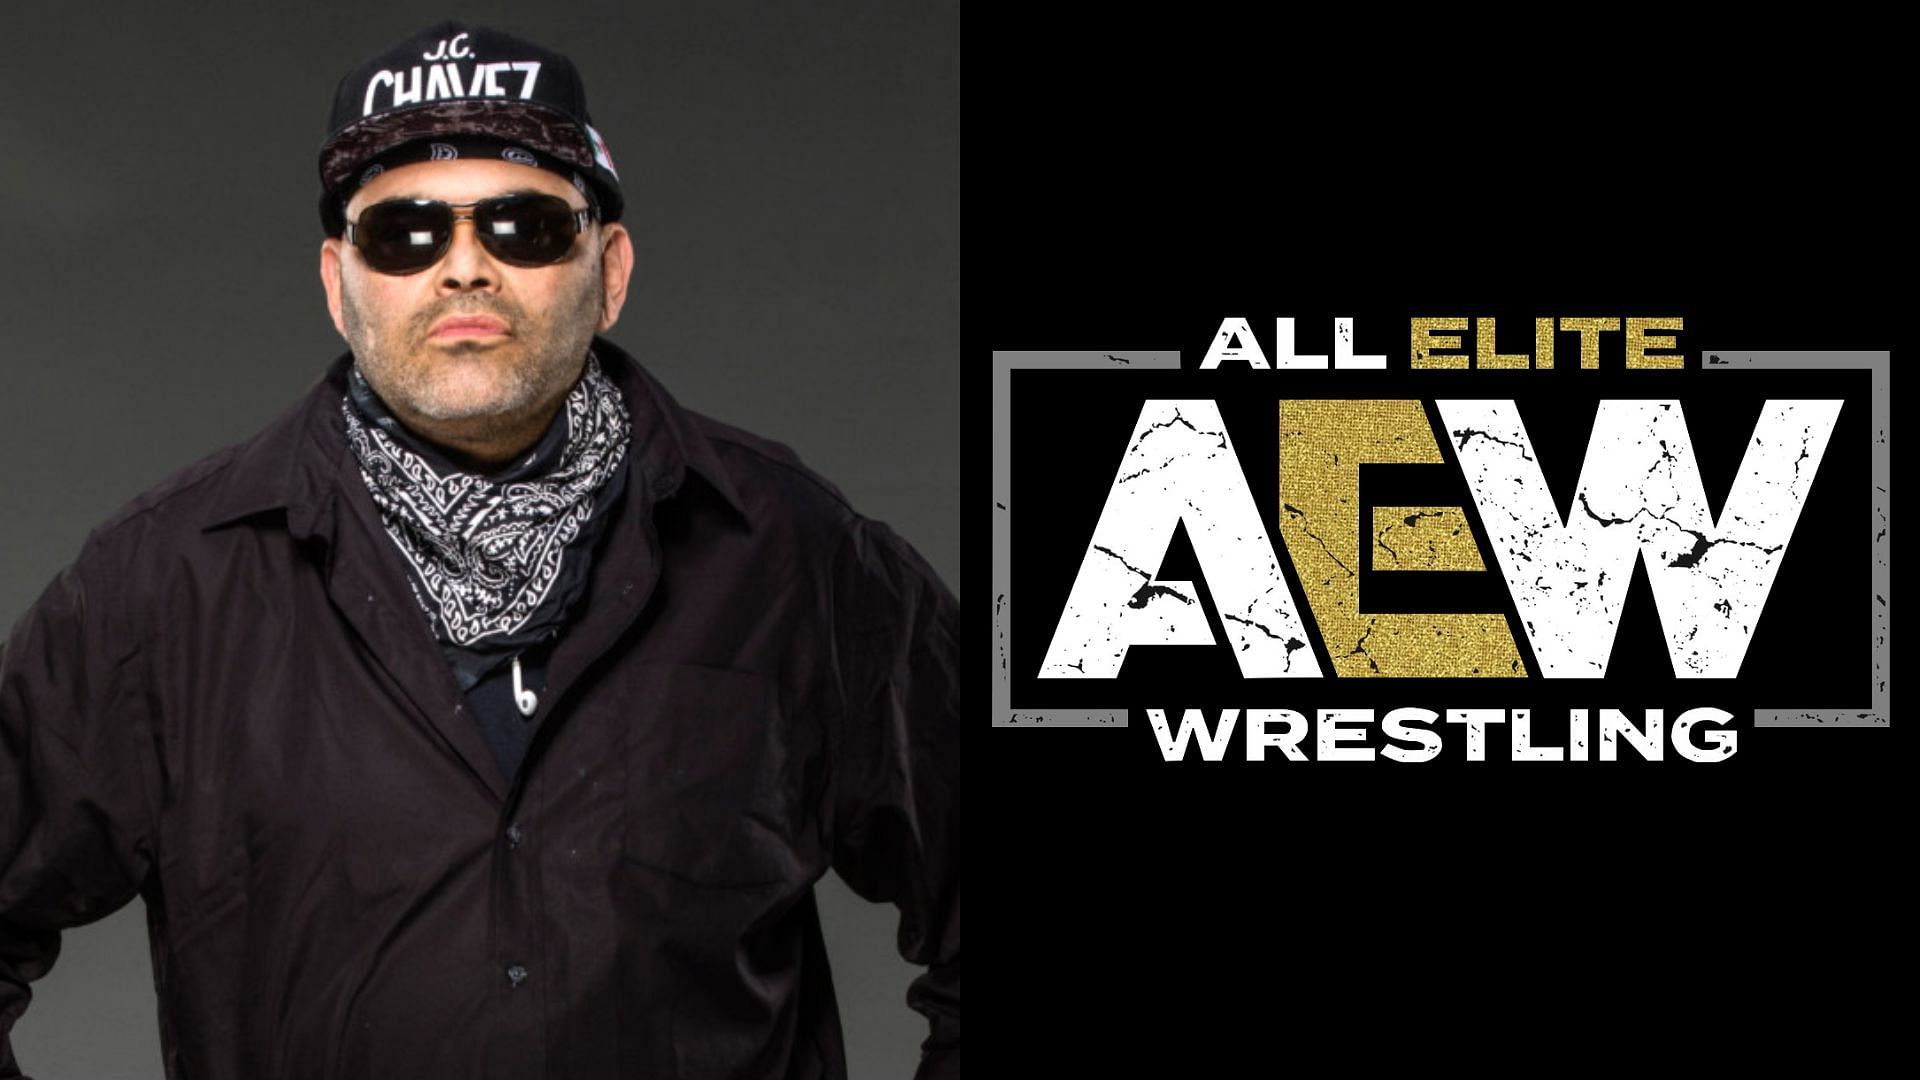 Konnan has made some critical assessments of AEW.